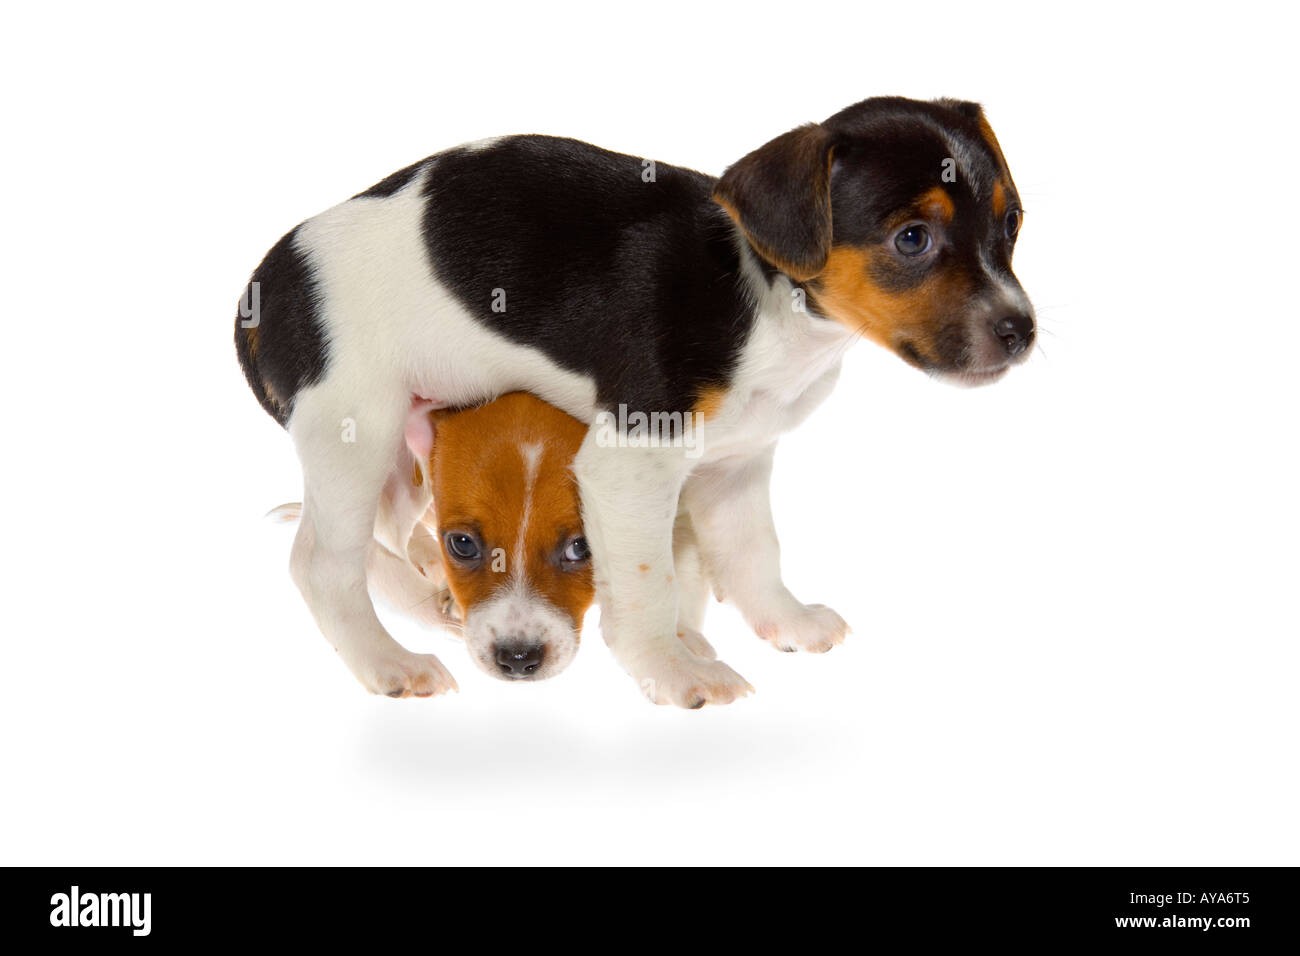 Two seven week old Jack Russell Terrier puppies on white background one standing the other squeezing underneath legs. JMH1980 Stock Photo